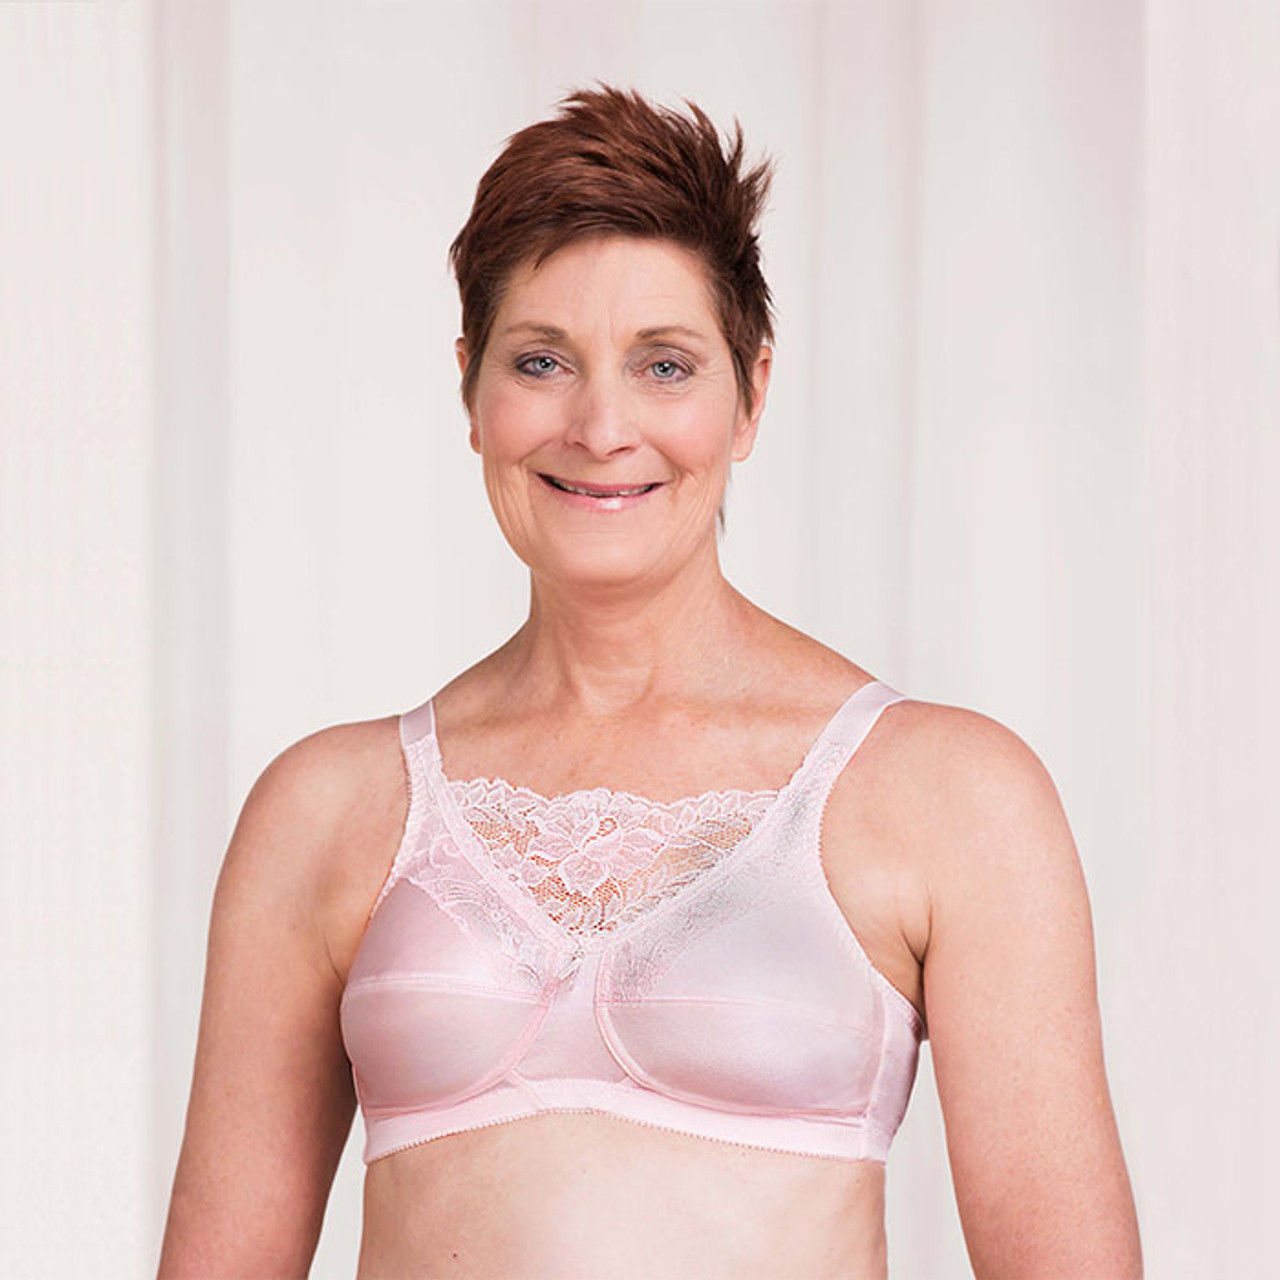 NEARLY ME Lace Accent Mastectomy Bra